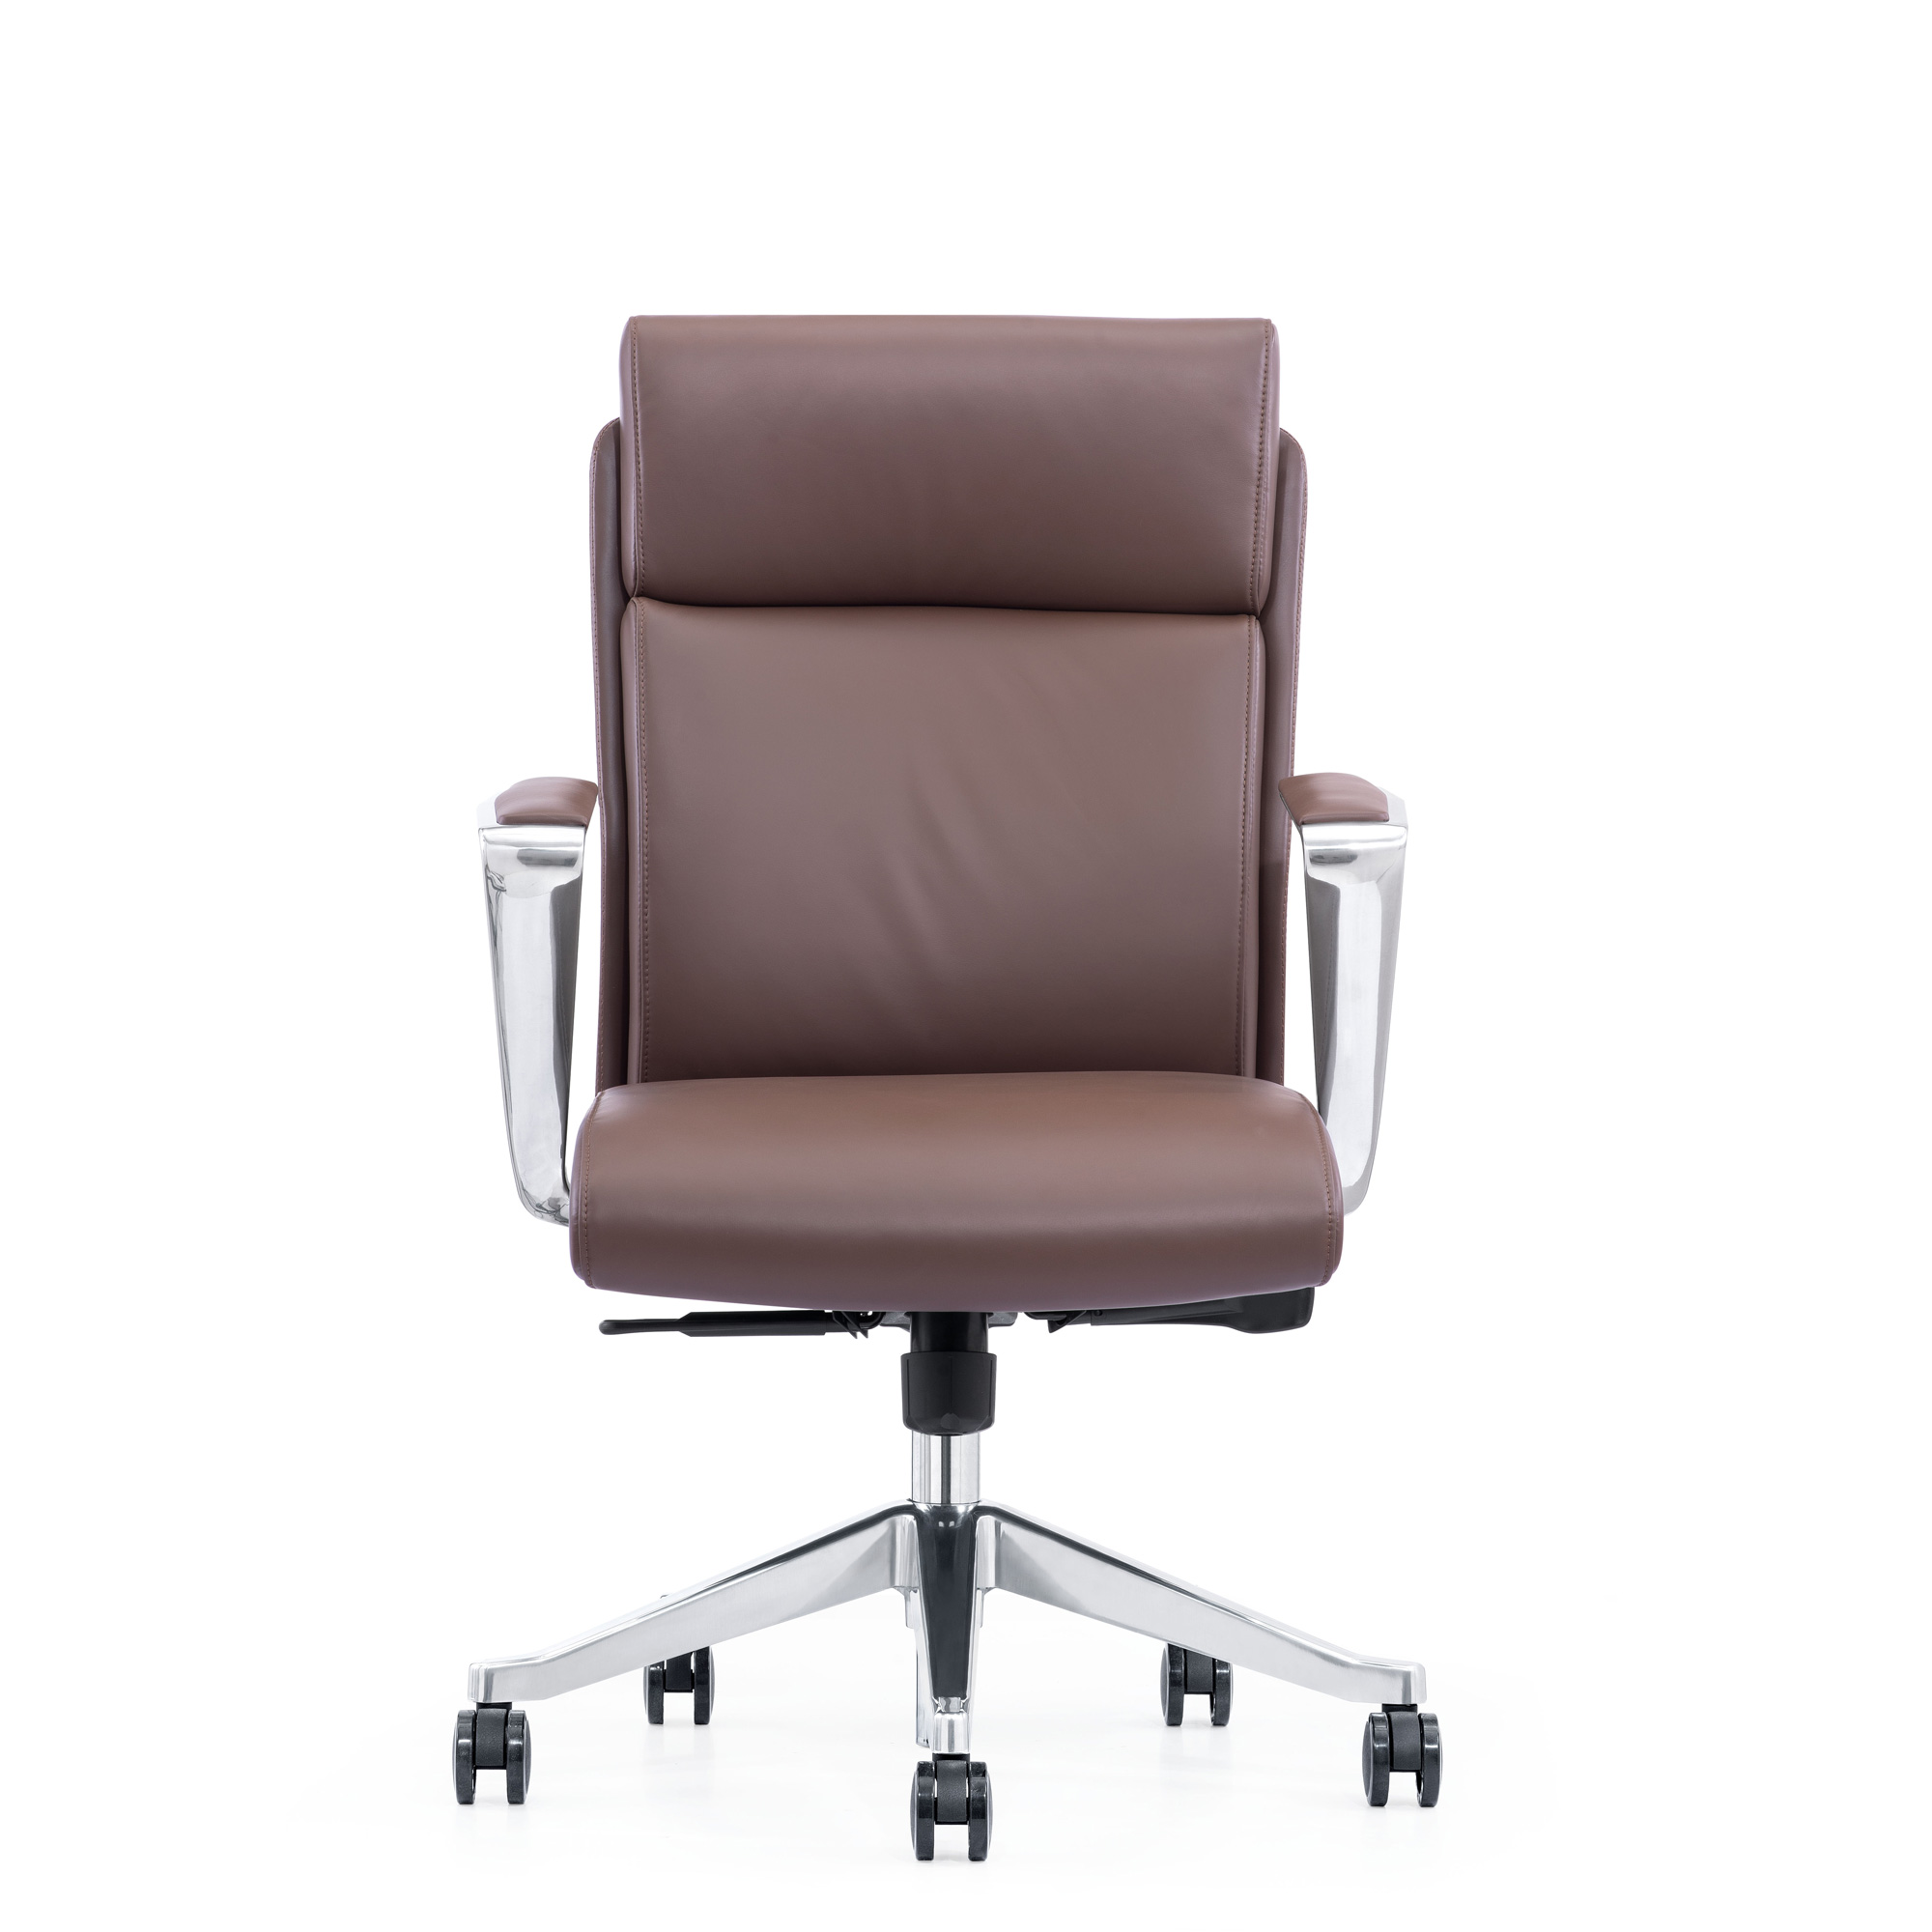 Brown Leather Office Chair With Arms and Wheels